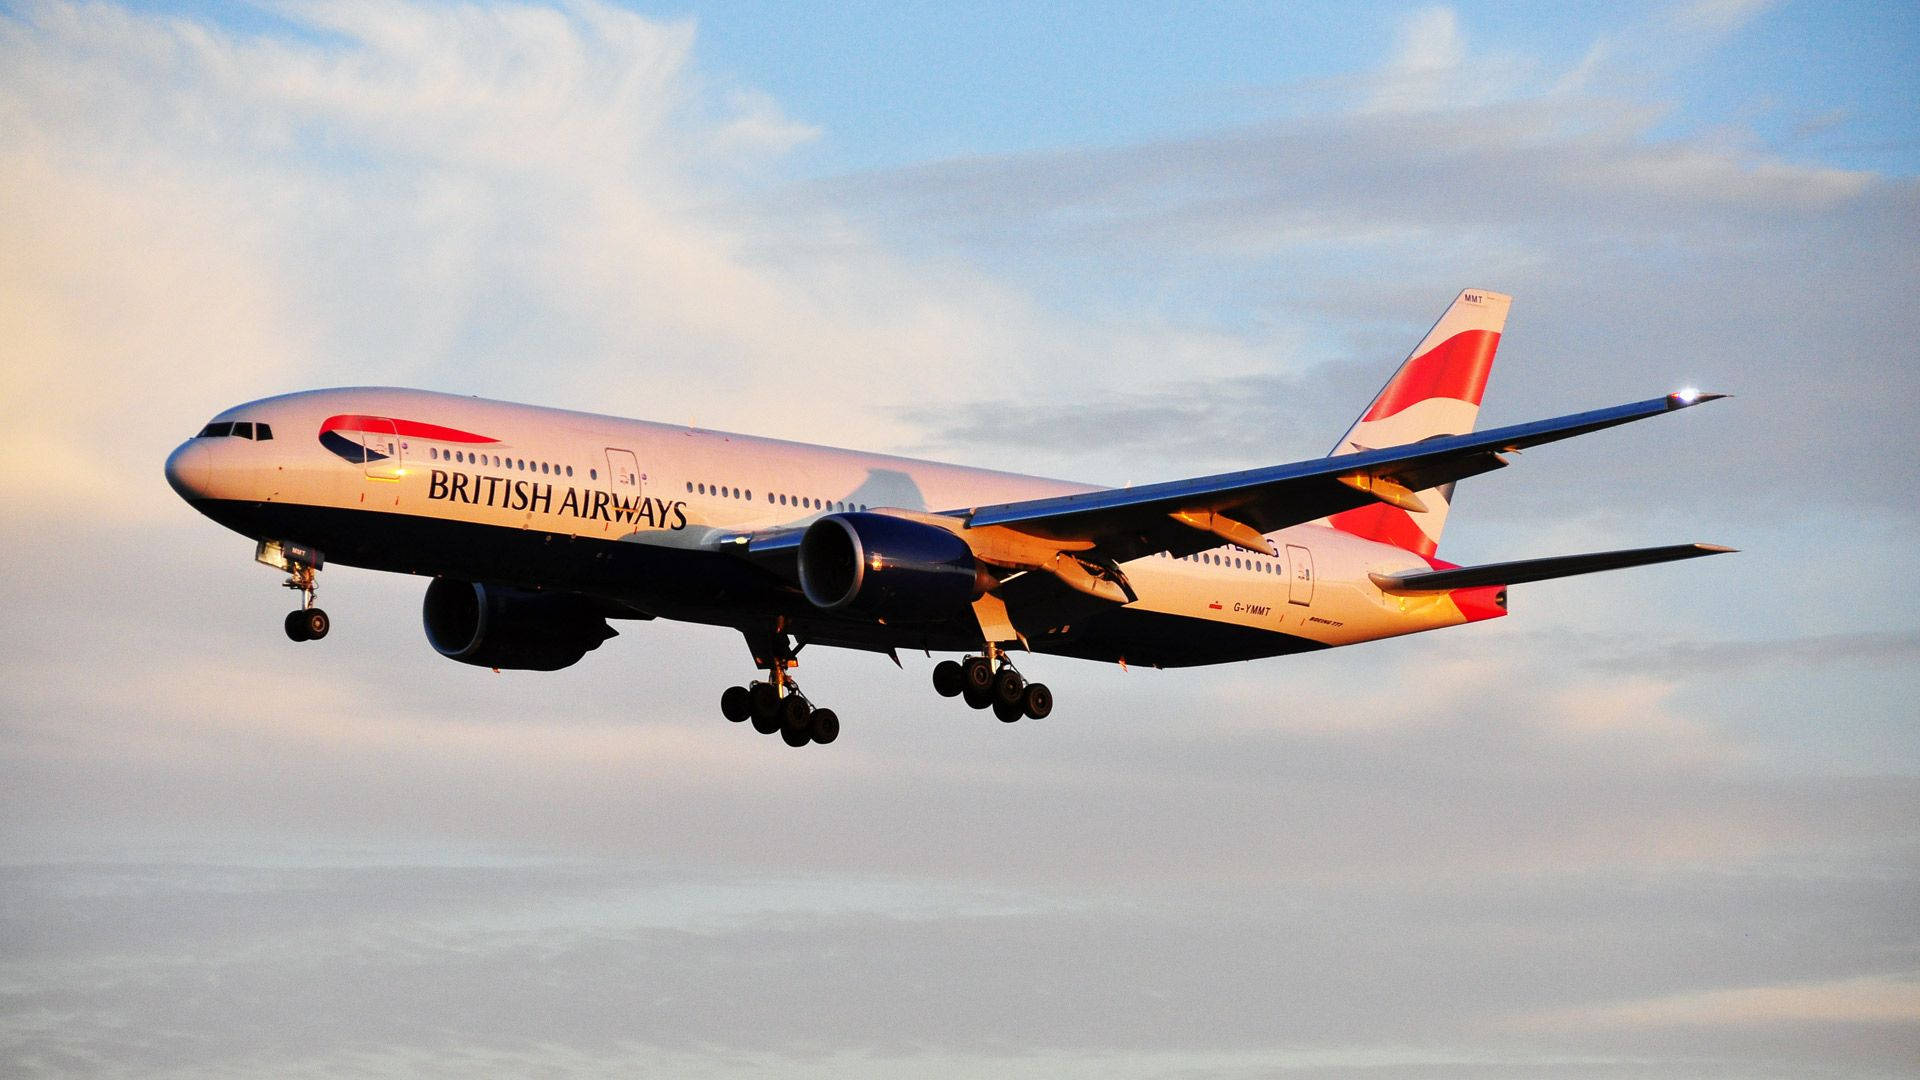 Flying Airplane From British Airways Sunny Day Wallpaper